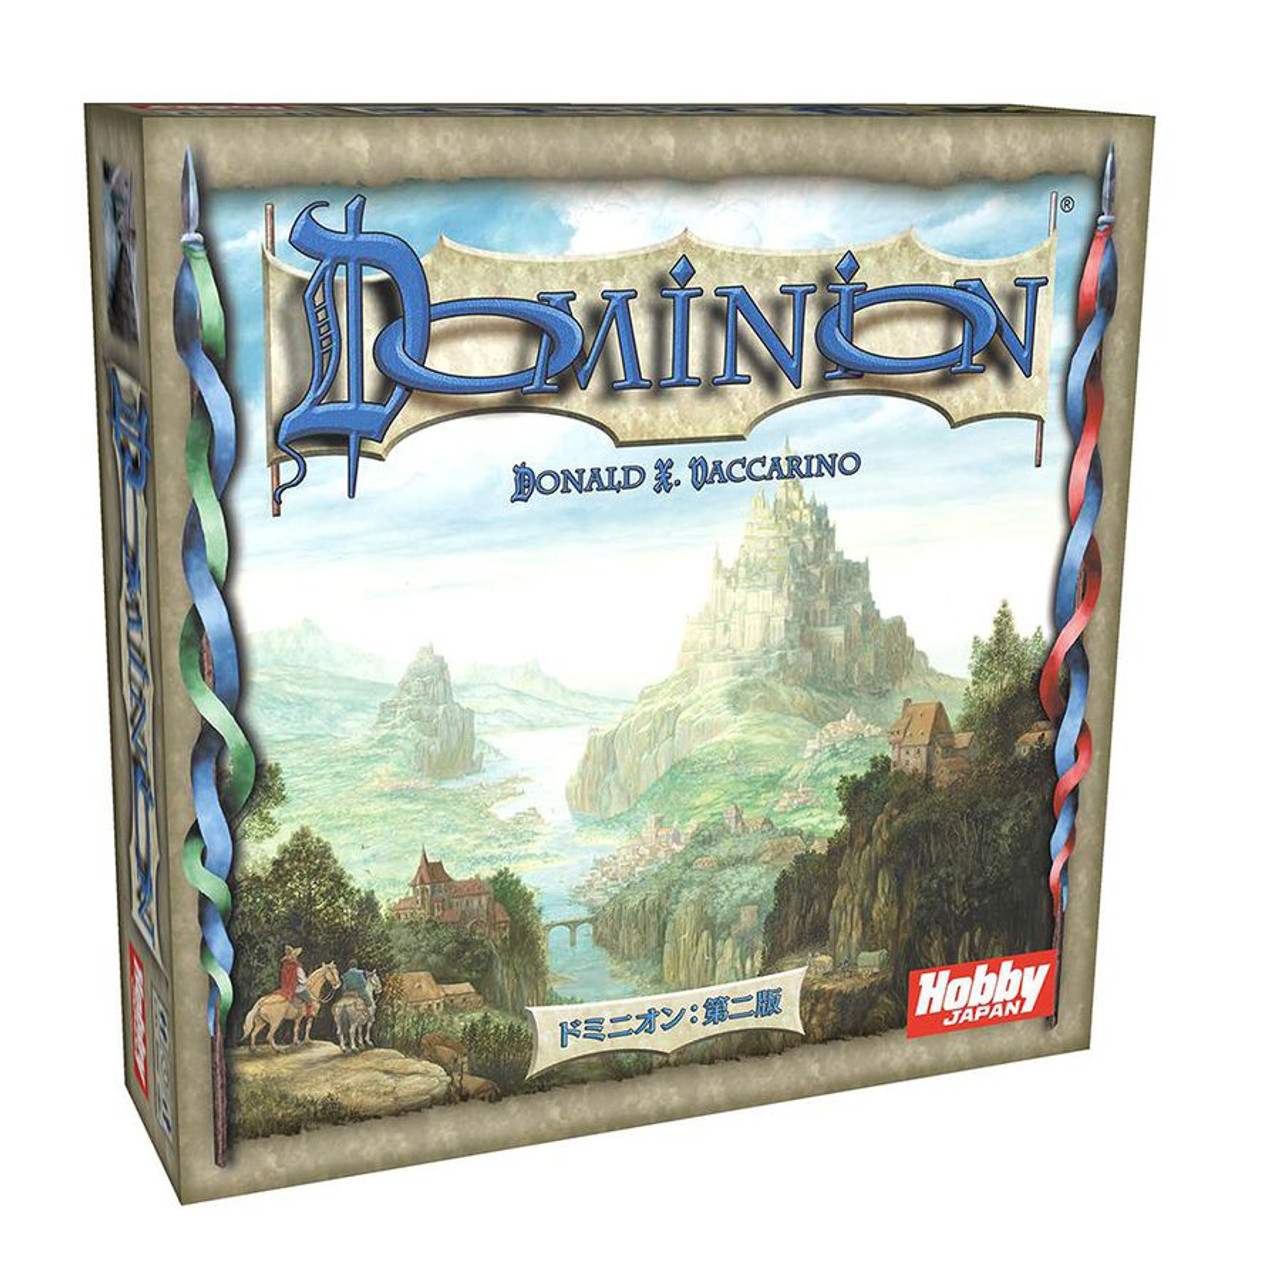 Dominion 2nd edition